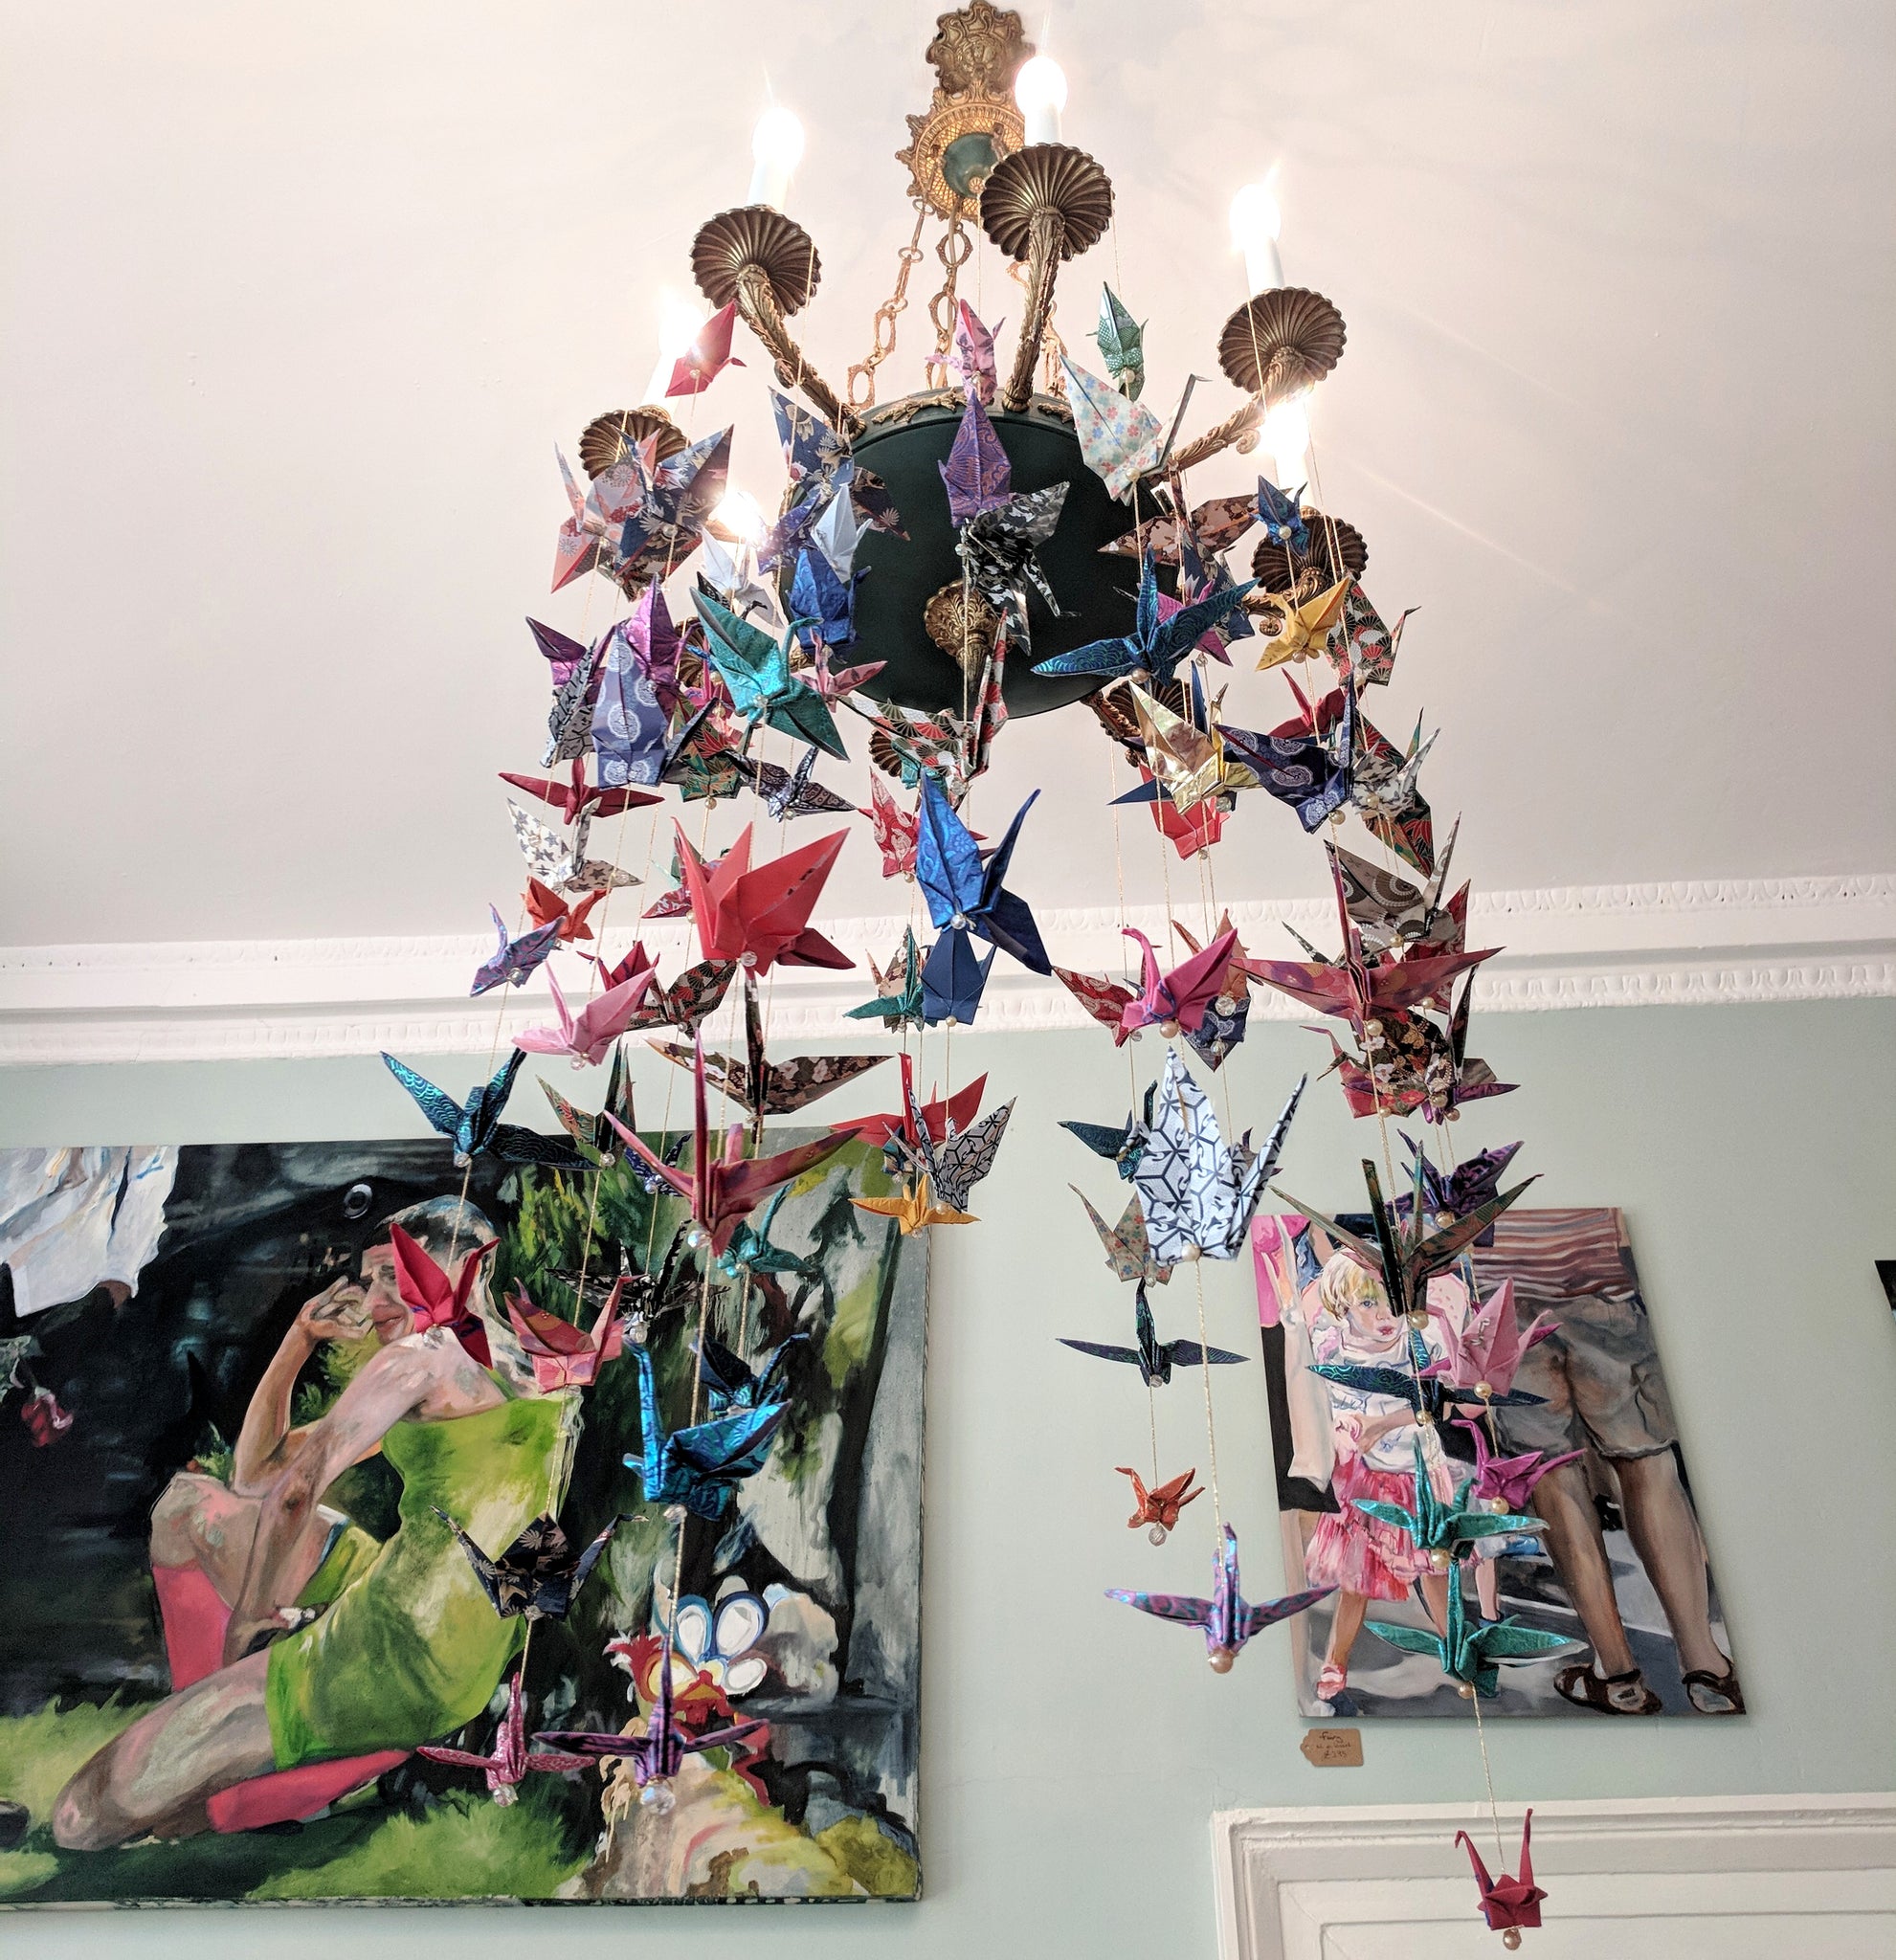 Chandelier decorated with Colourful Origami Cranes